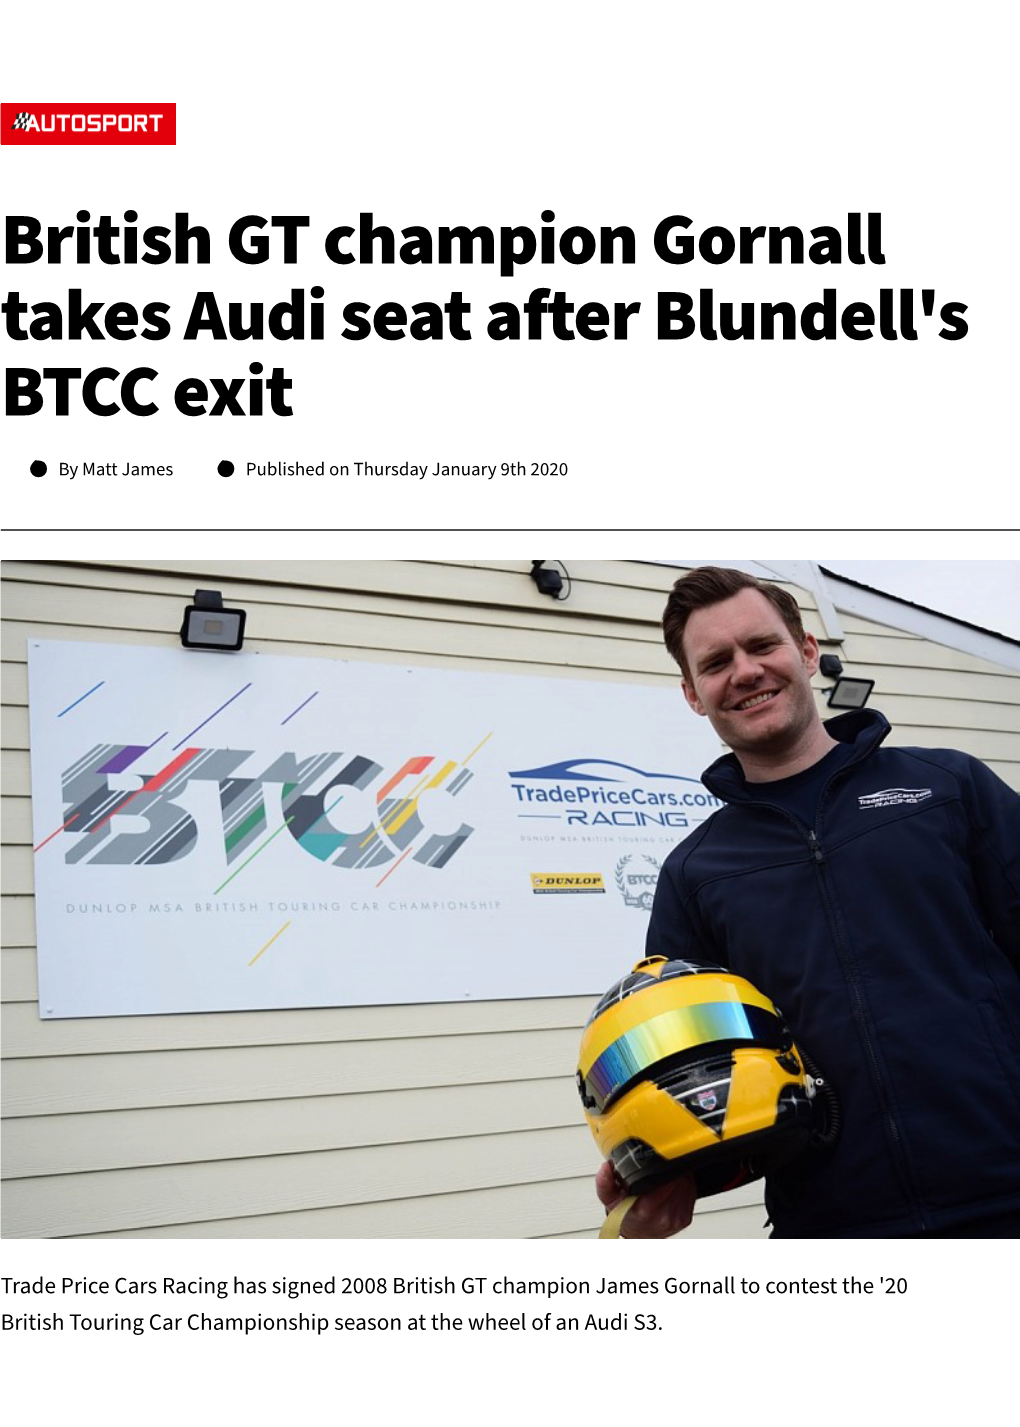 British GT Champion Gornall Takes Audi Seat After Blundell's BTCC Exit